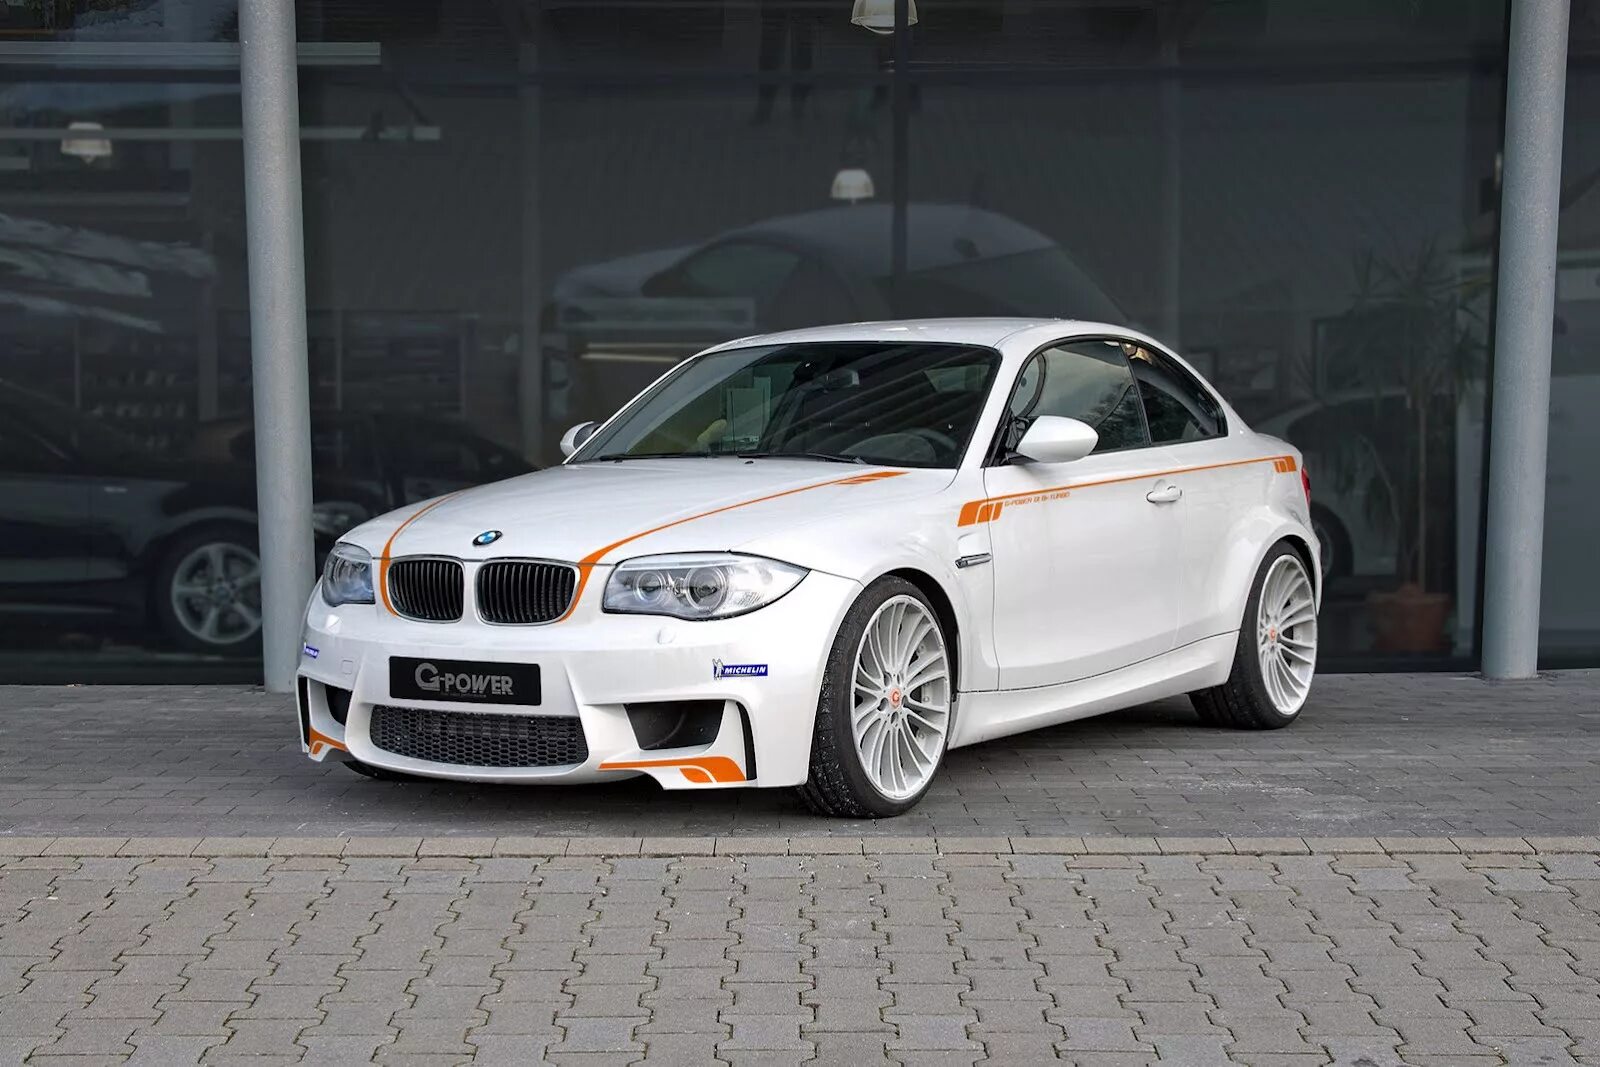 Bmw m coupe. BMW 1m Coupe. БМВ м1 купе. BMW M Coupe 2012. BMW m1 2012.